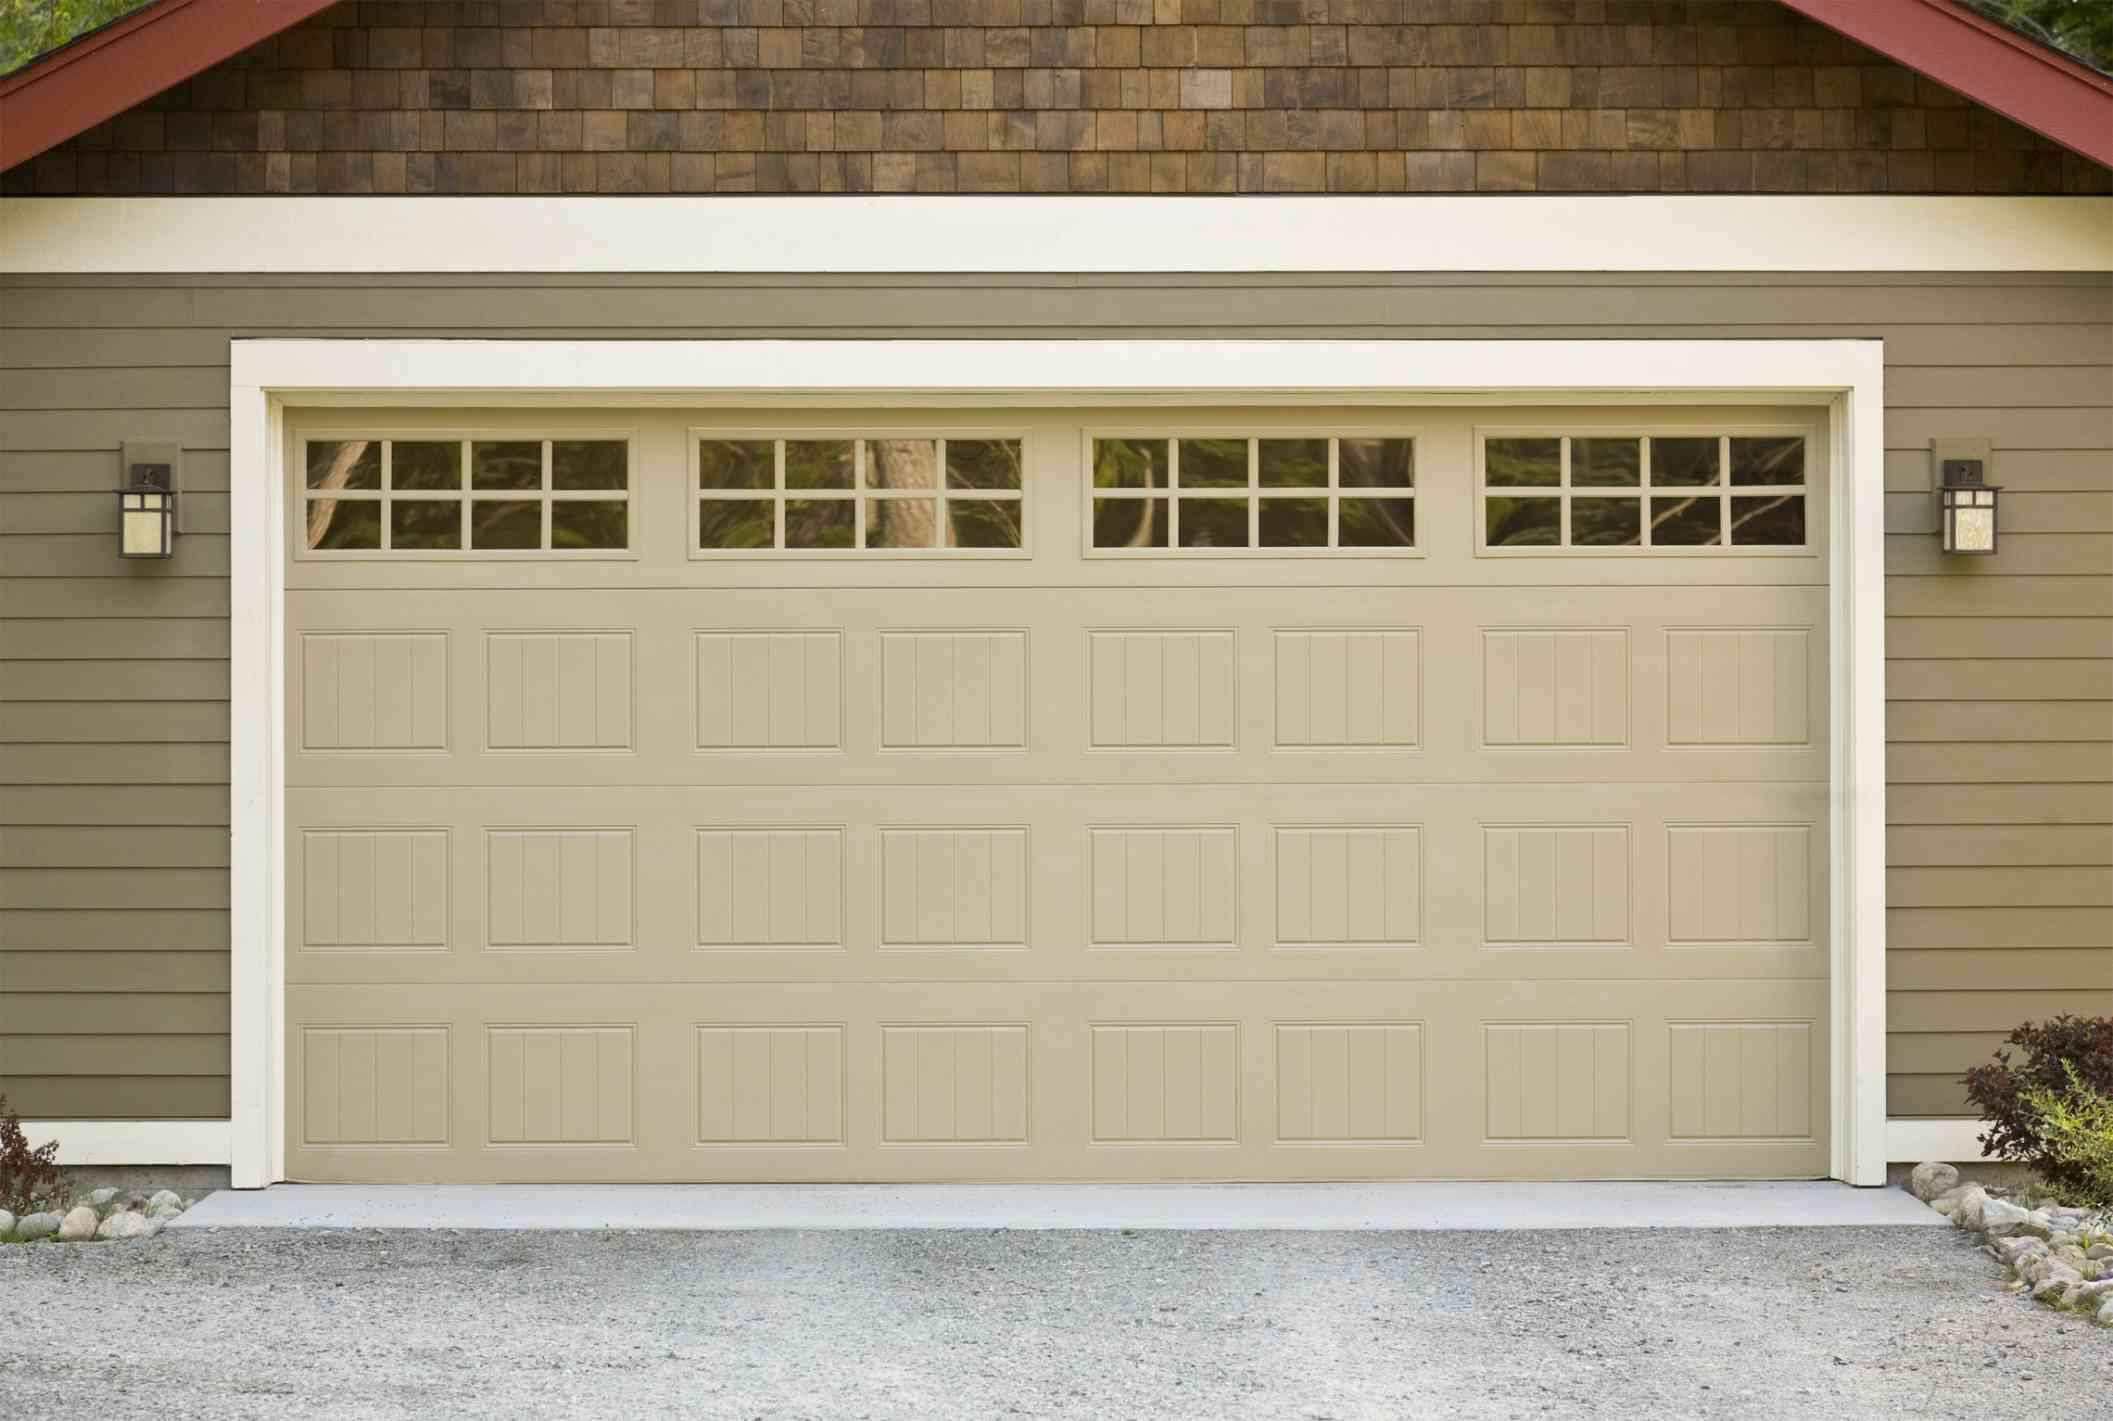 Closed garage door in private house